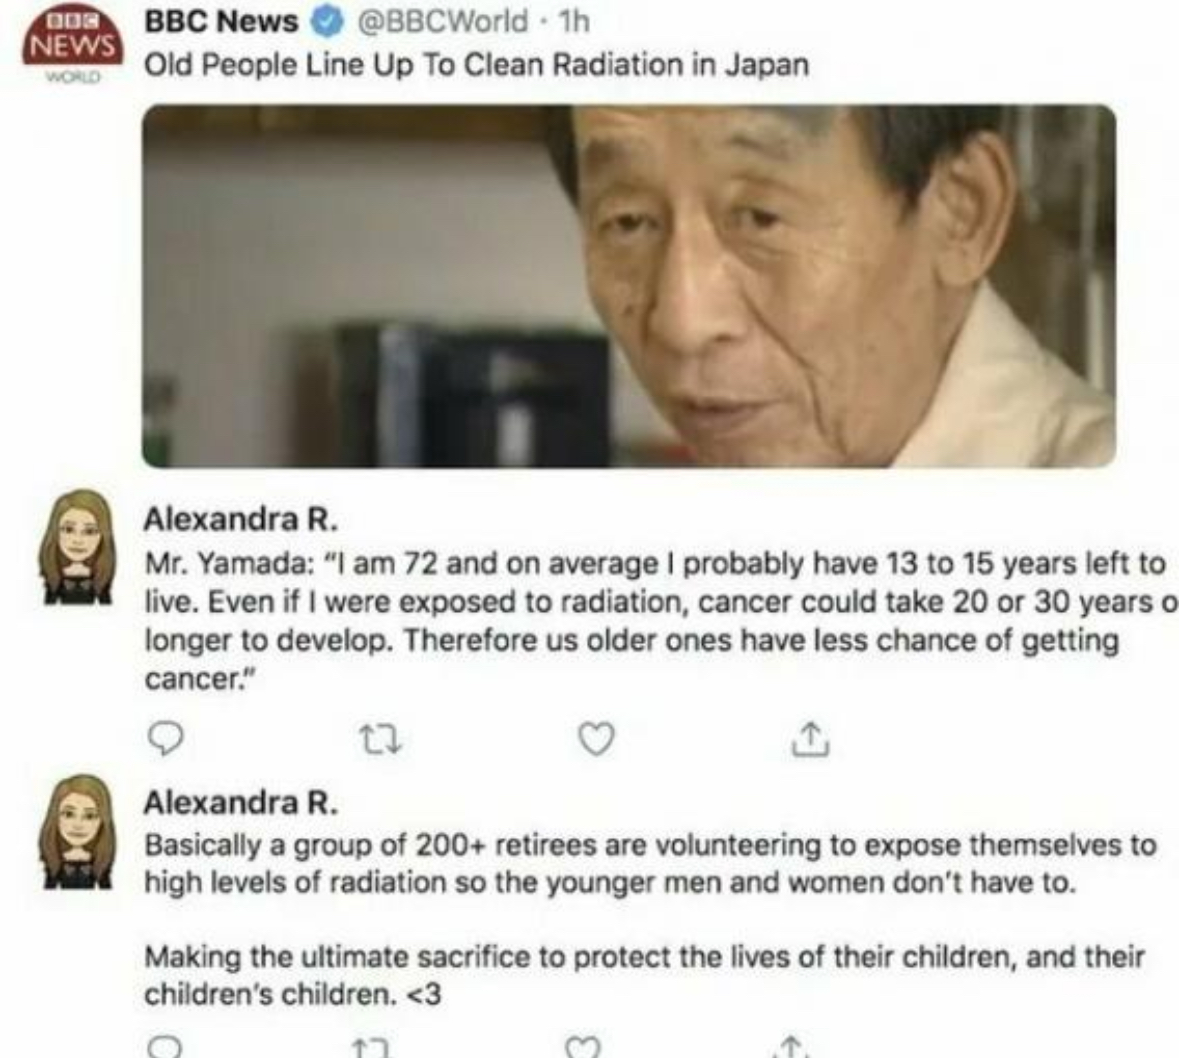 Japan's elder population is volunteering to help clean up radiation because they have less time to live anyway

This is what long term thinking generational thinking looks like in a society

Serious question: could you ever see American boomers doing something like this?